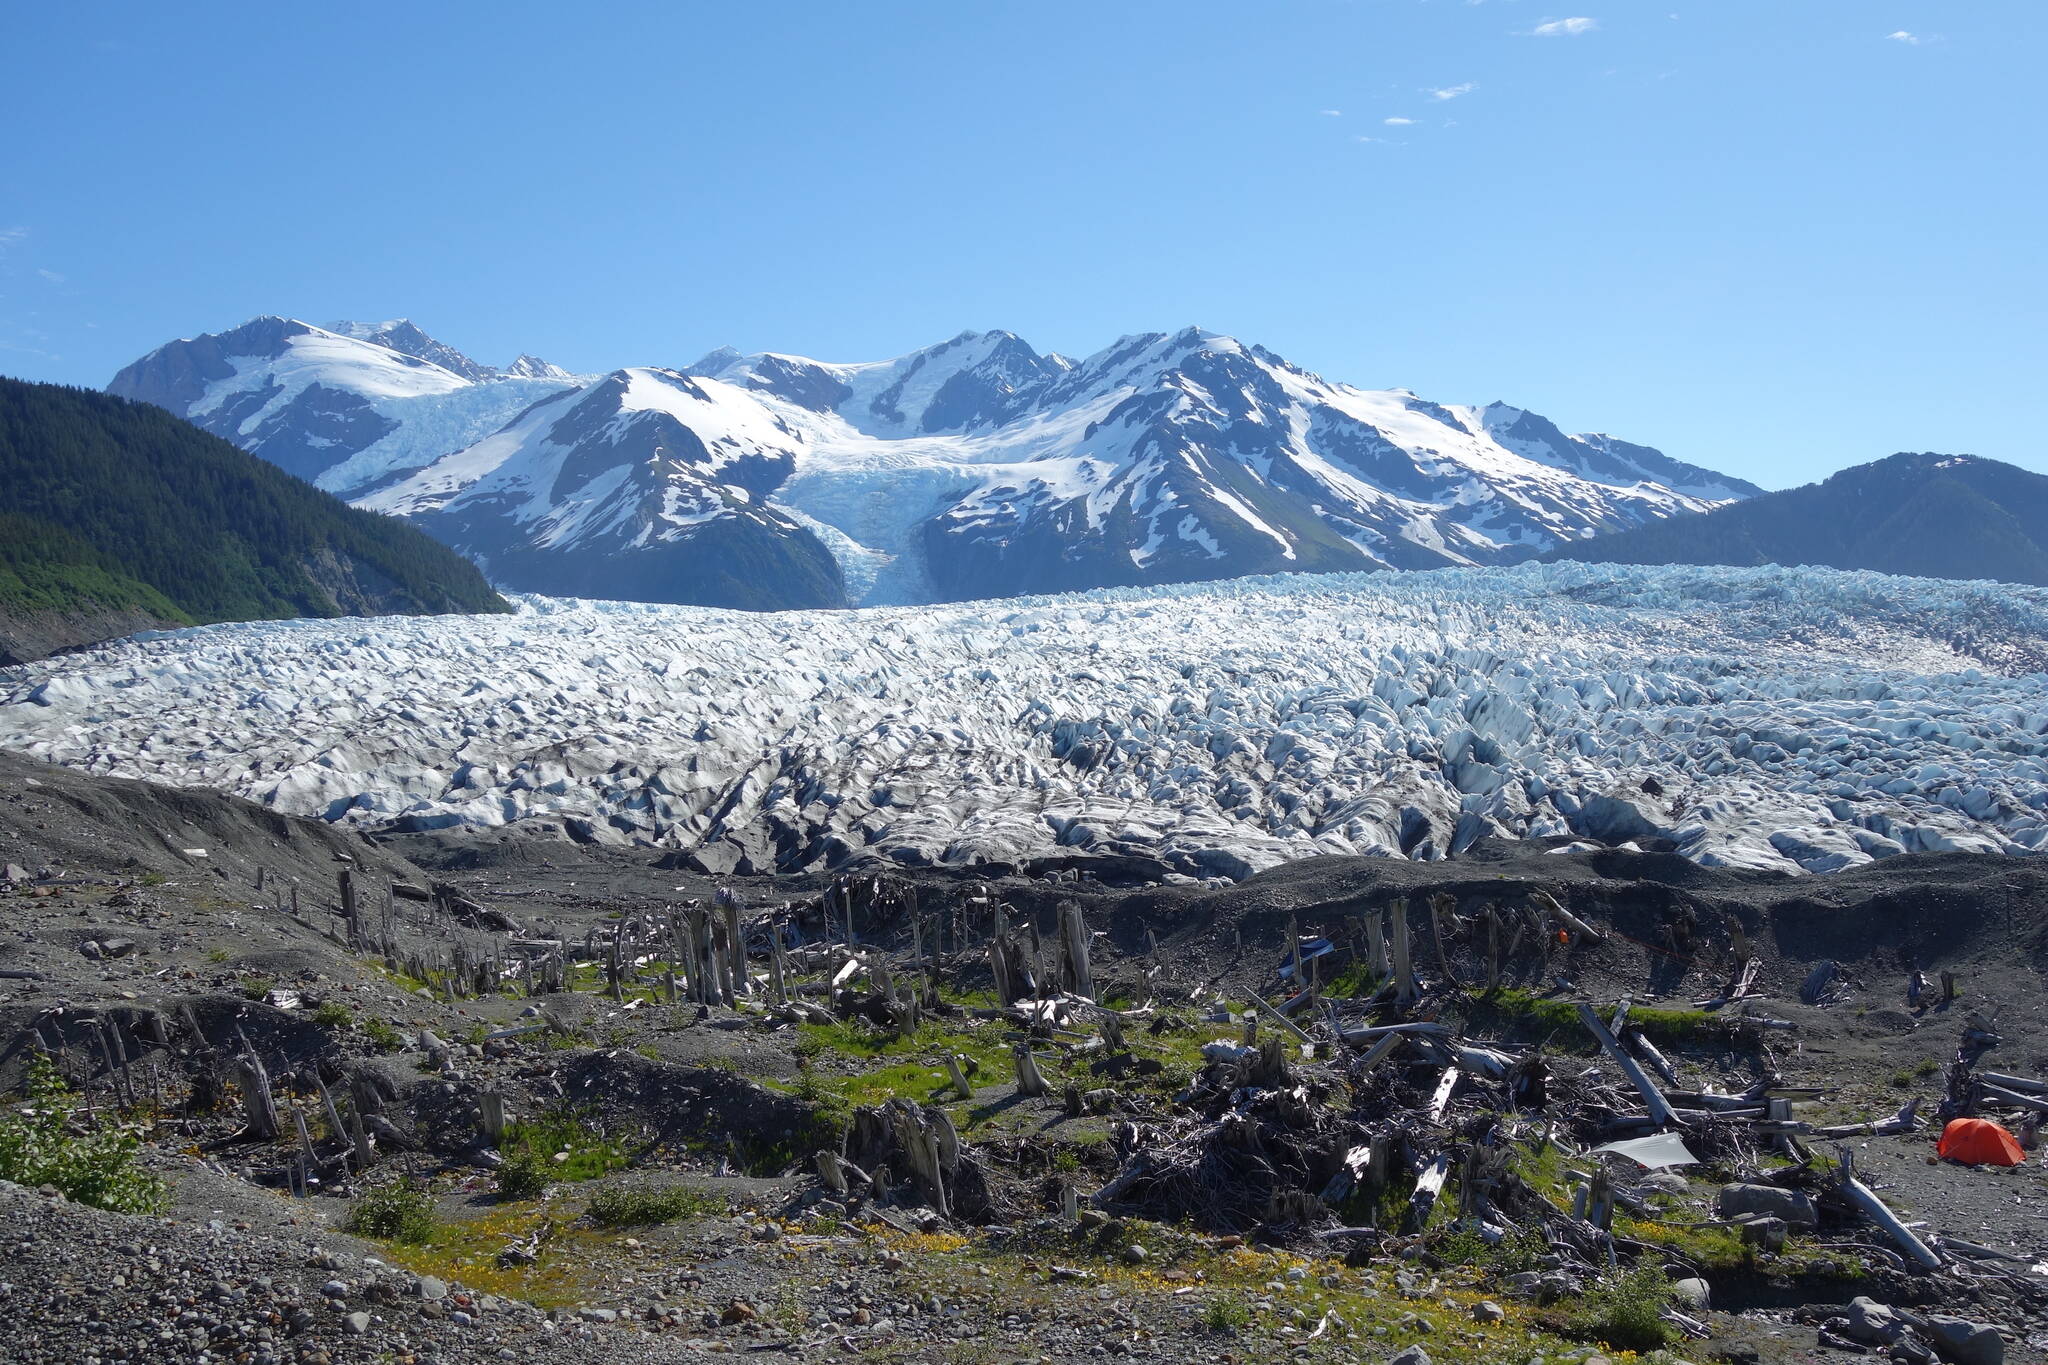 La Perouse Glacier in Southeast Alaska retreats from a campsite in summer 2021. (Photo by Ned Rozell)